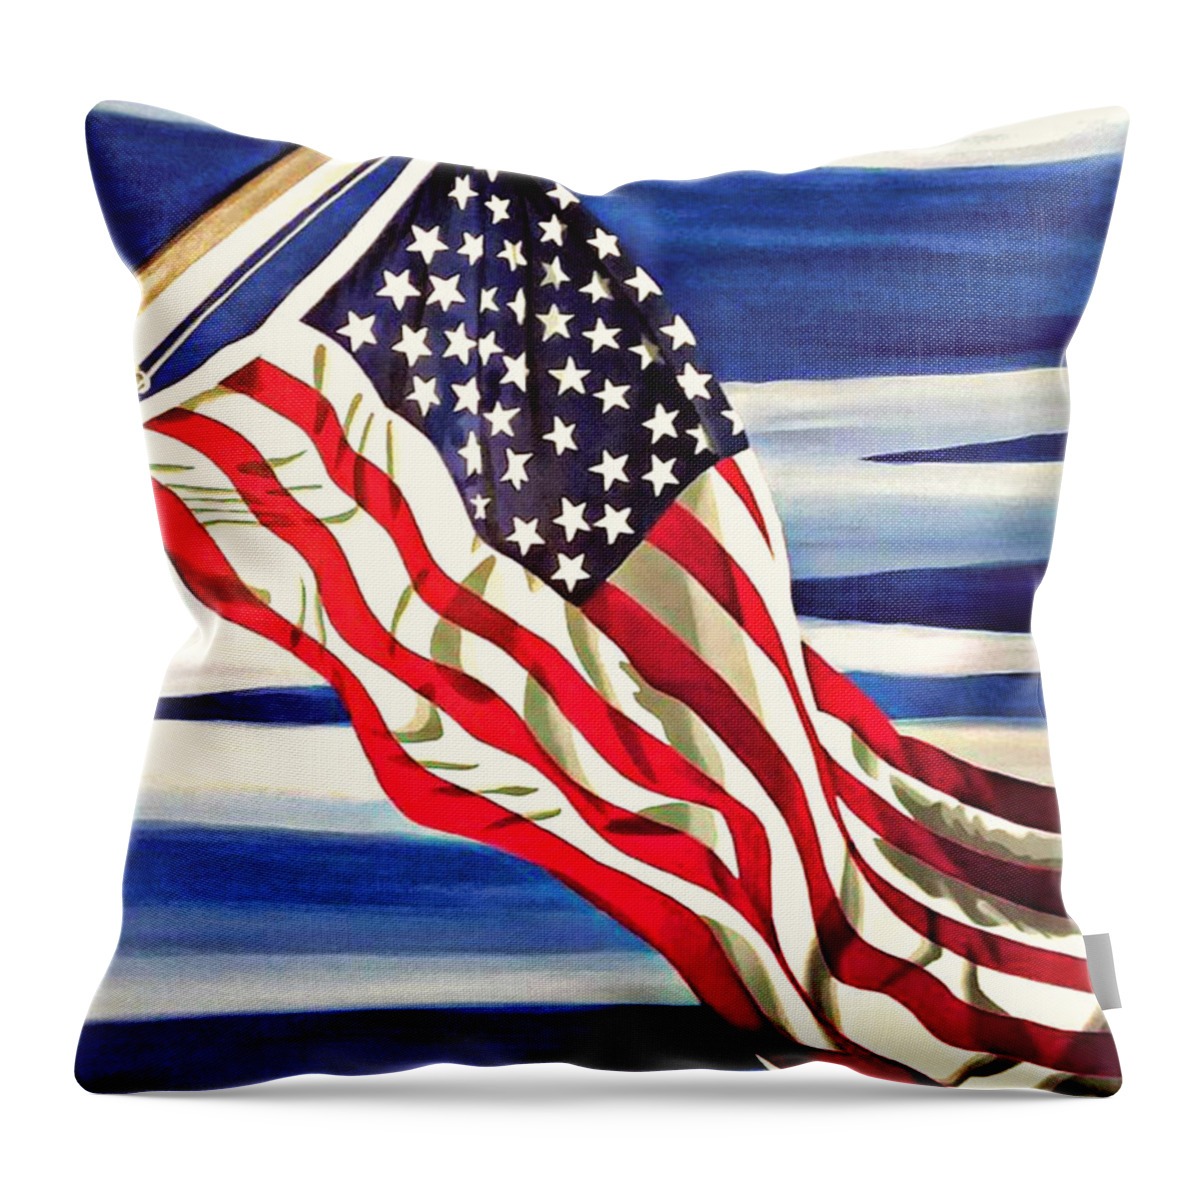 Flag Throw Pillow featuring the painting Old Glory I by Emanuel Alvarez Valencia